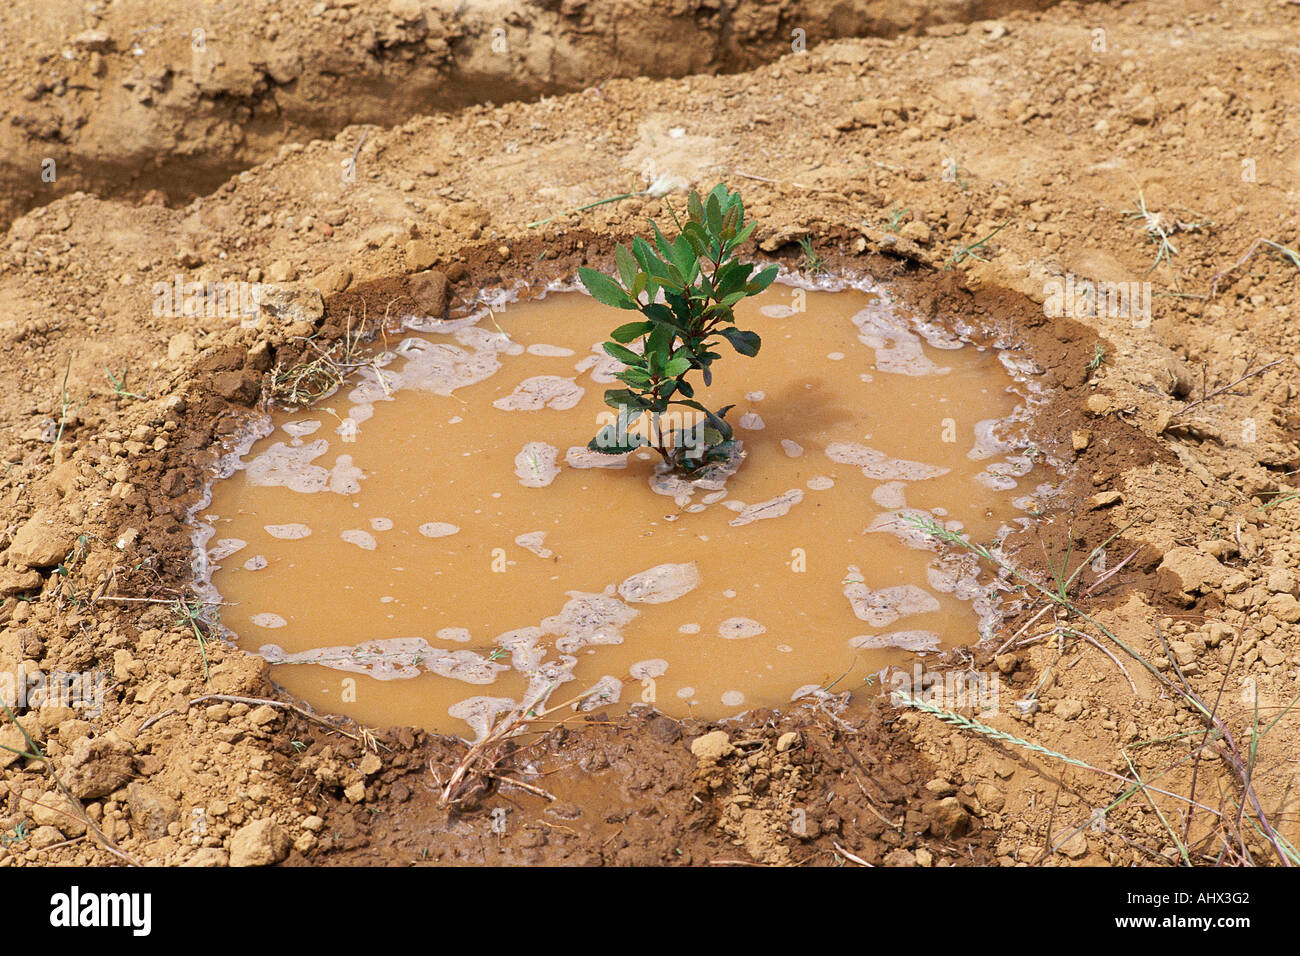 Newly planted shrub in puddle Stock Photo